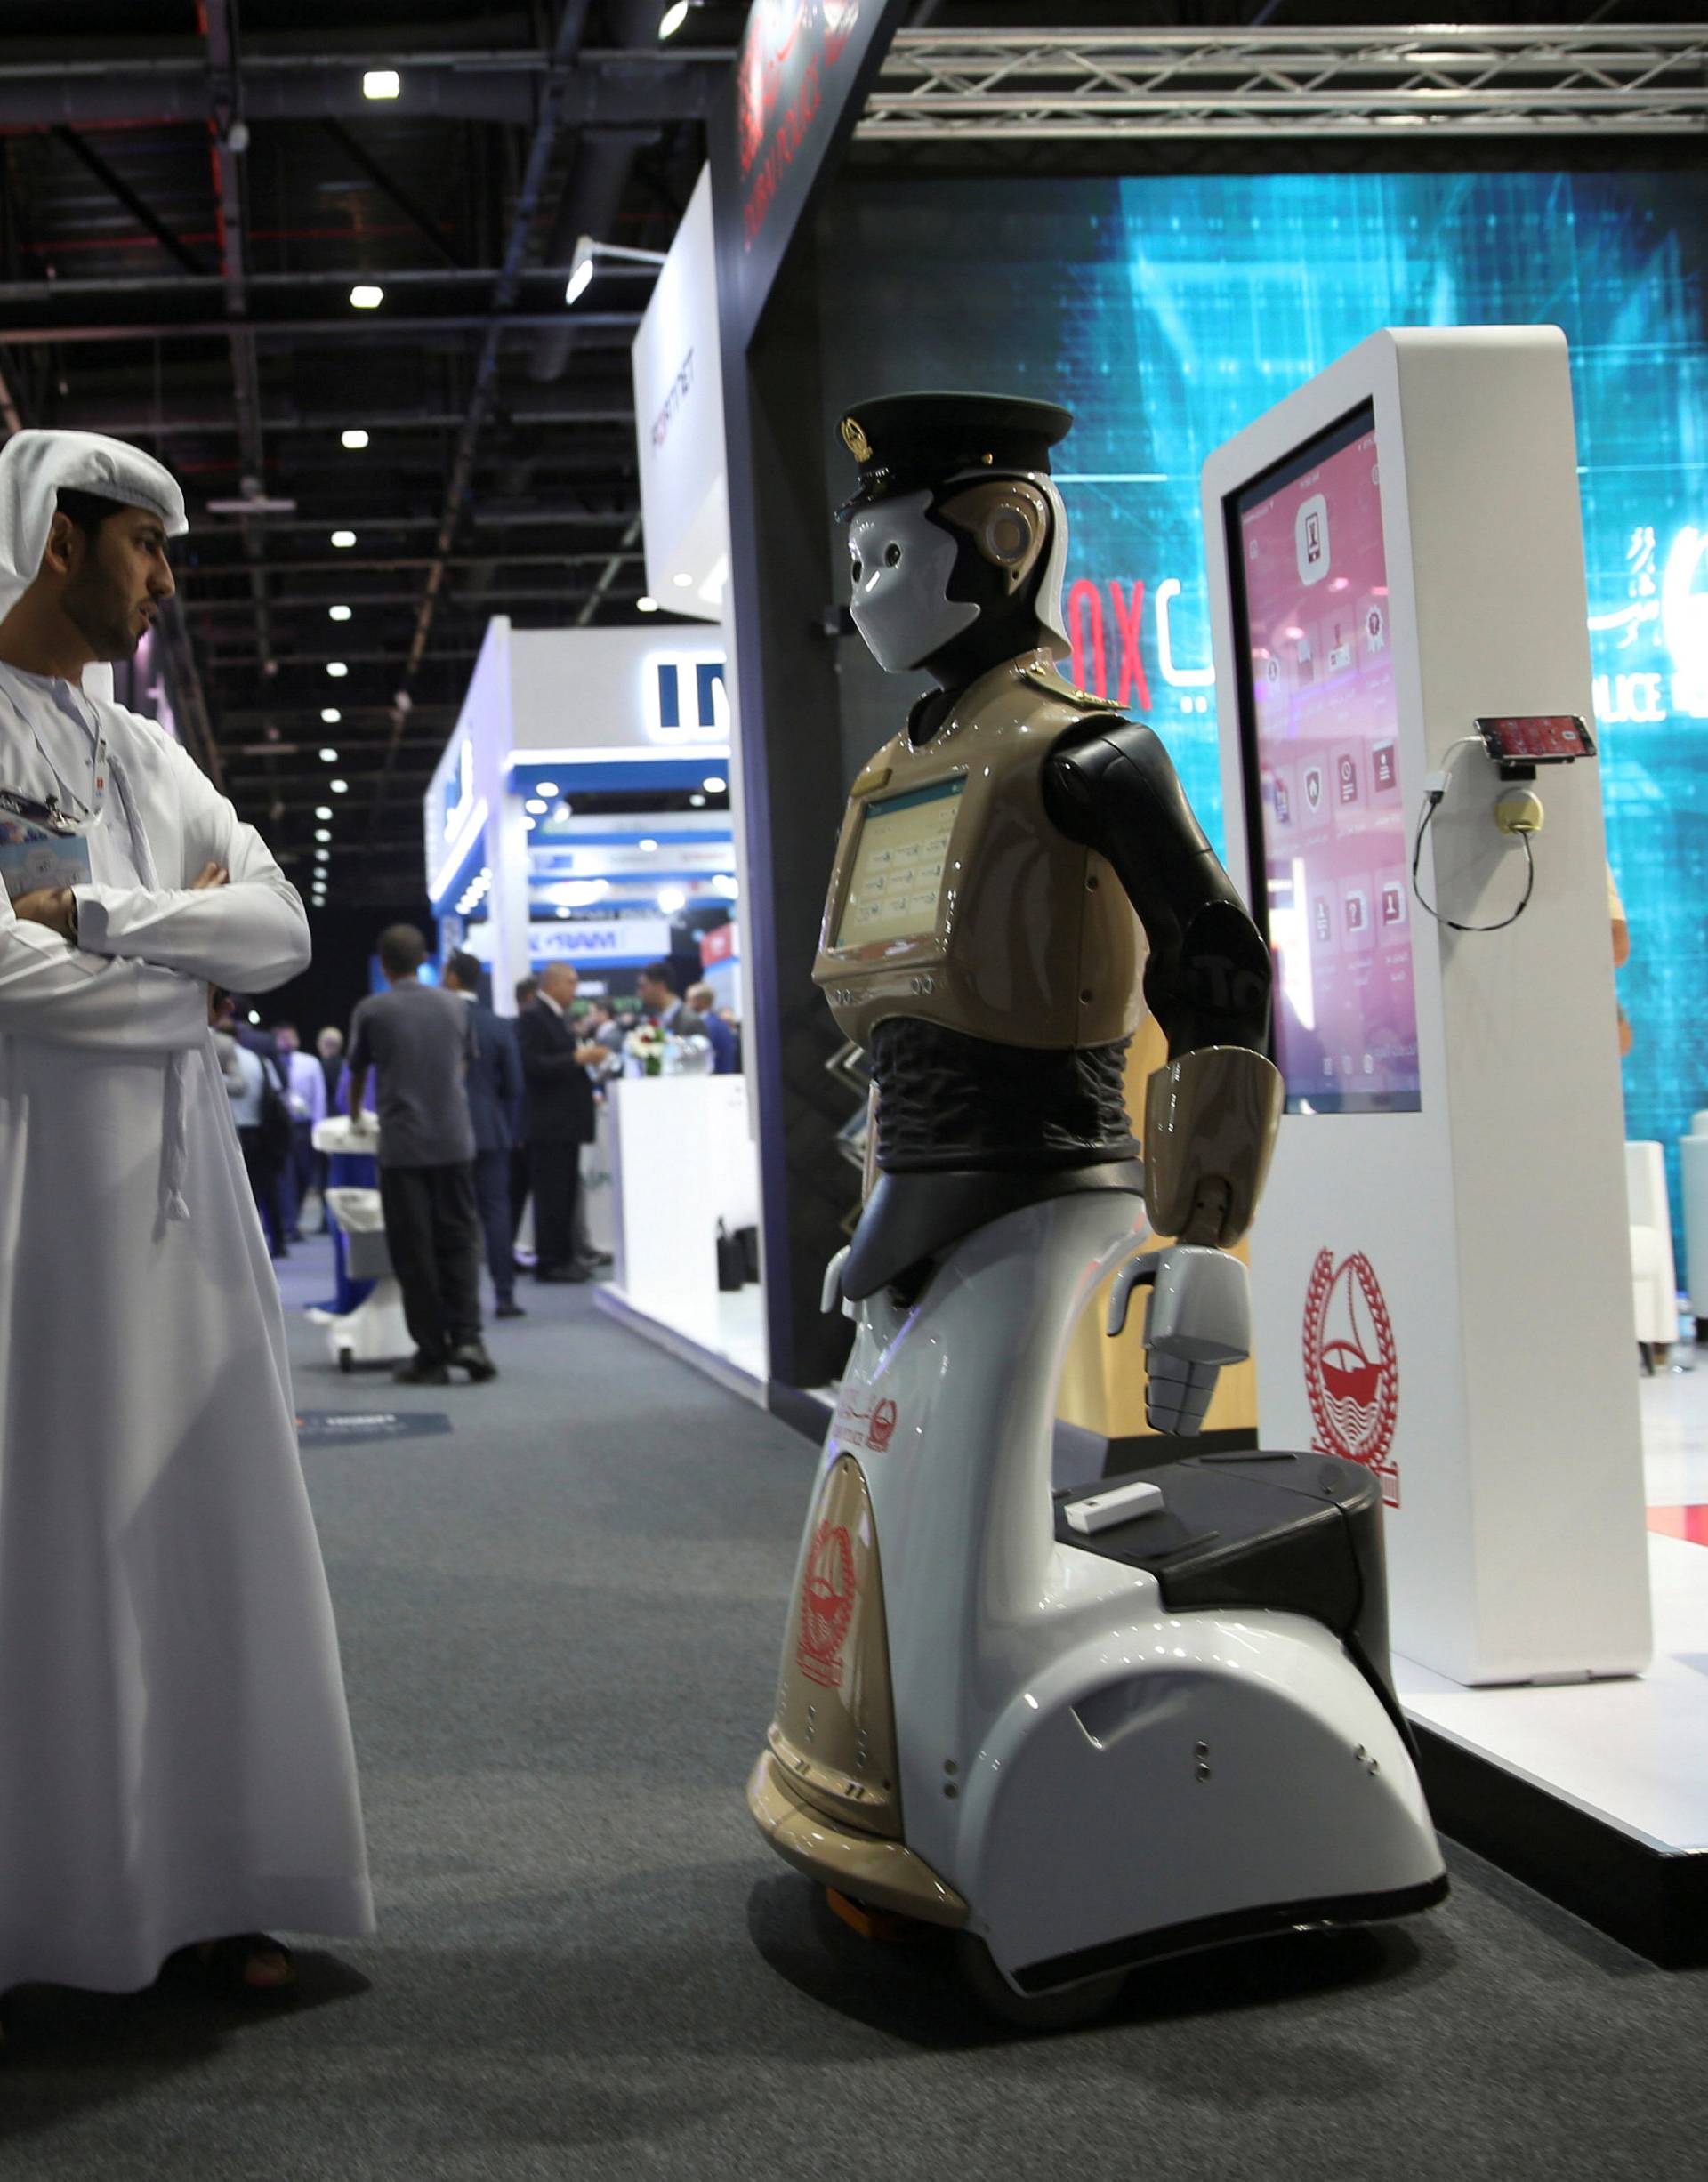 Visitors look at an operational robot policeman at the opening of the 4th Gulf Information Security Expo and Conference (GISEC) in Dubai